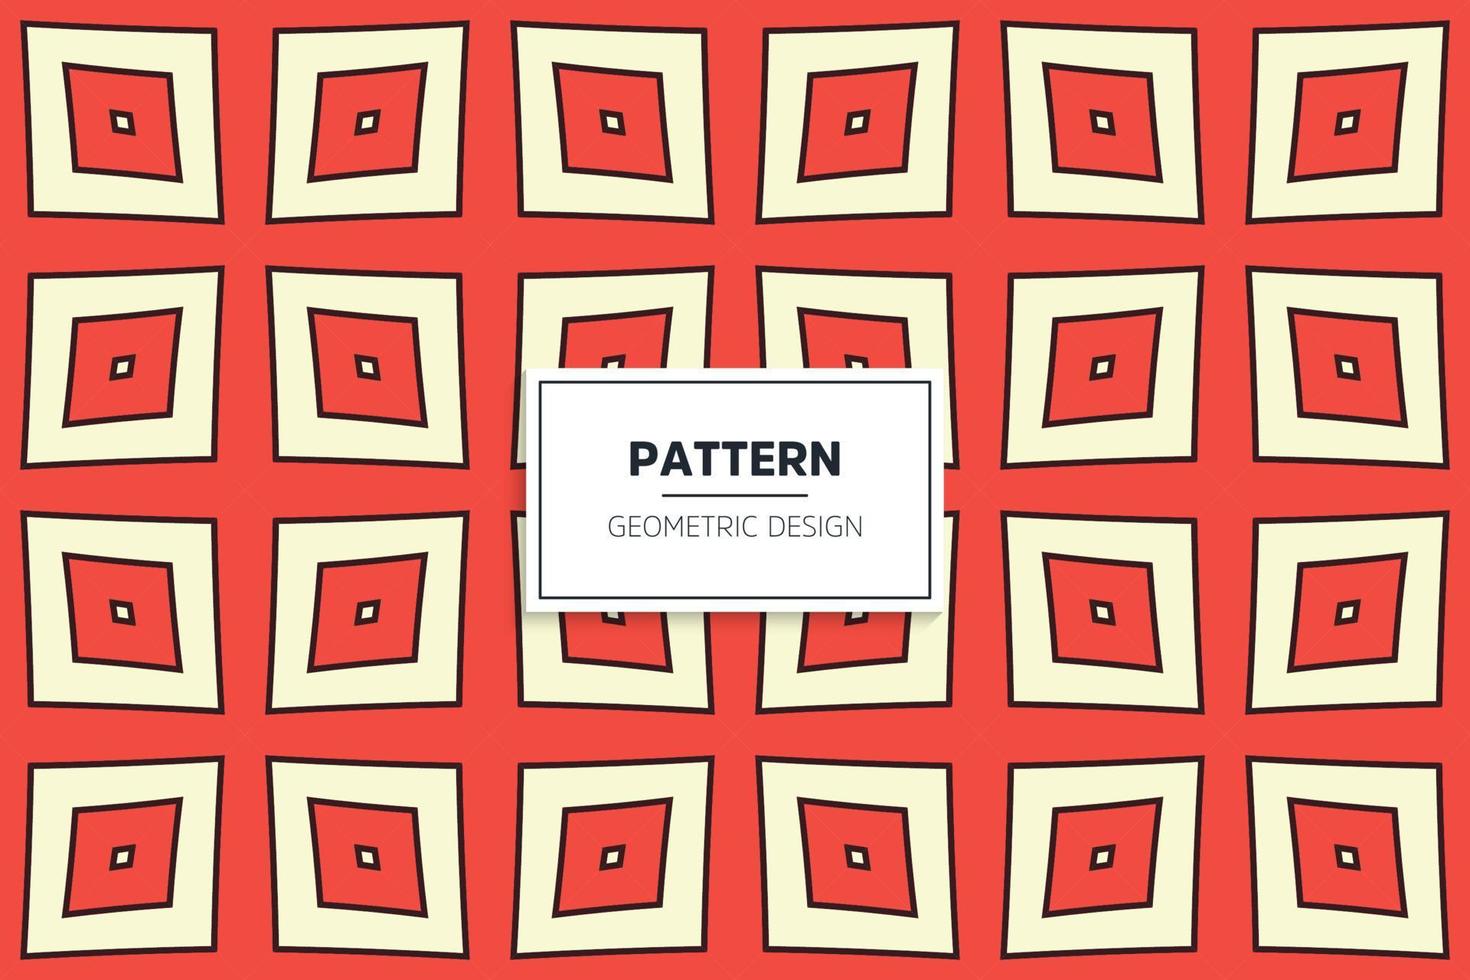 Seamless pattern with colorful elements vector